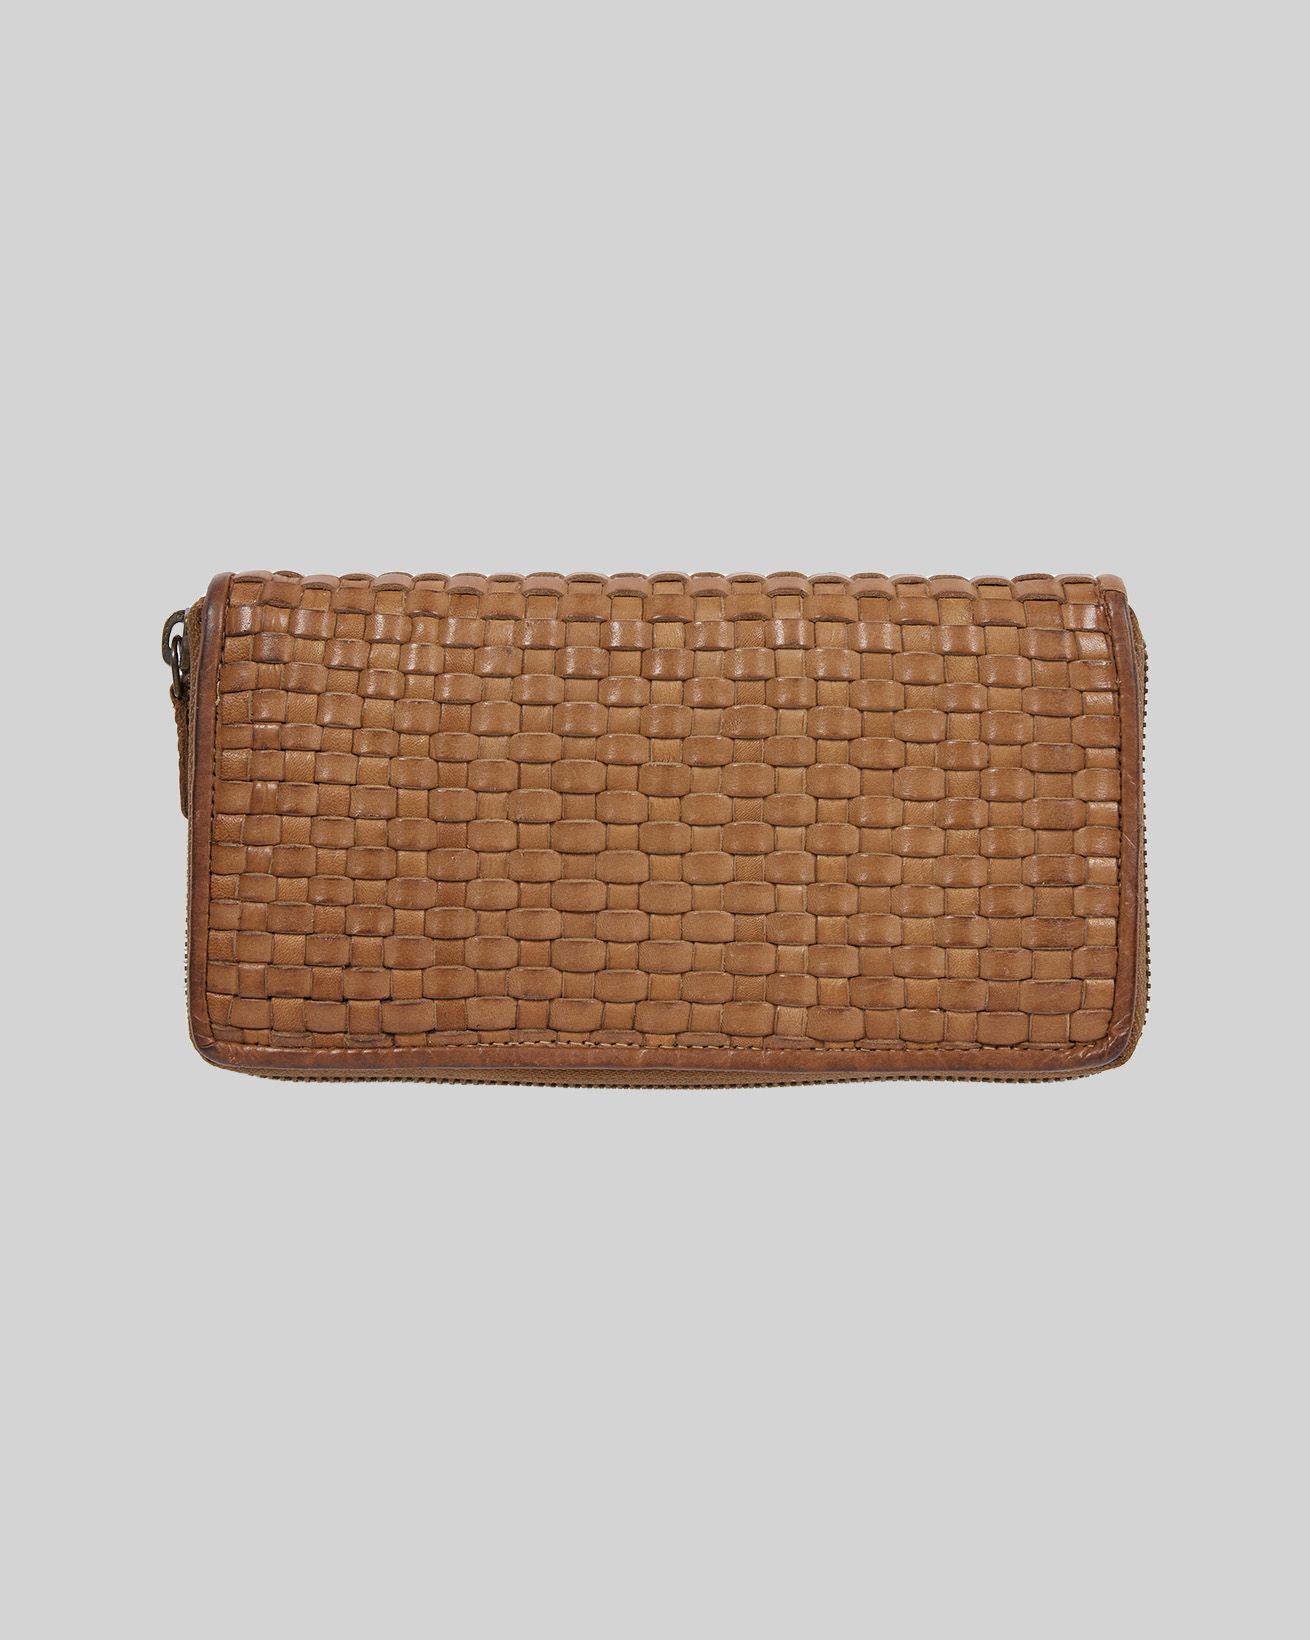 8052_woven-leather-matinee-purse_antique-brown_2_web.jpg